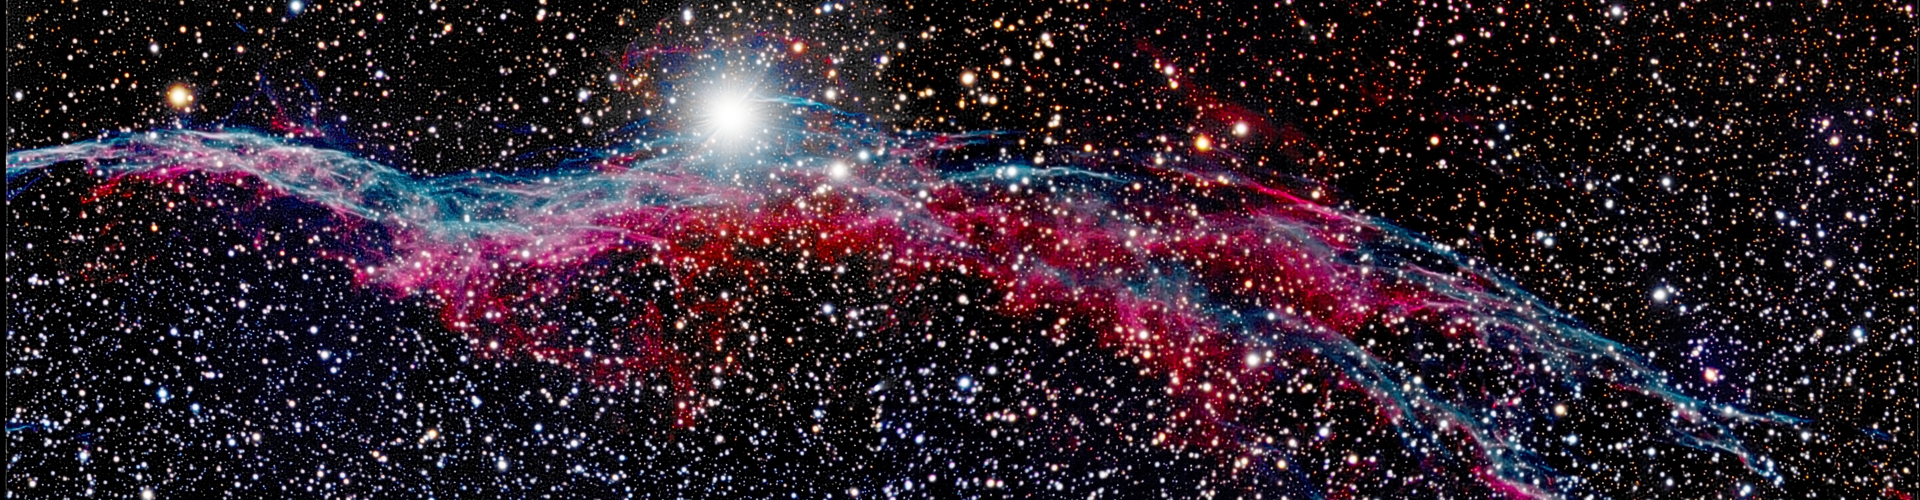 https://seriousastronomy.com/wp-content/uploads/2020/10/cropped-NGC-6960-LRGB-Mosaic-Rotated-1.png